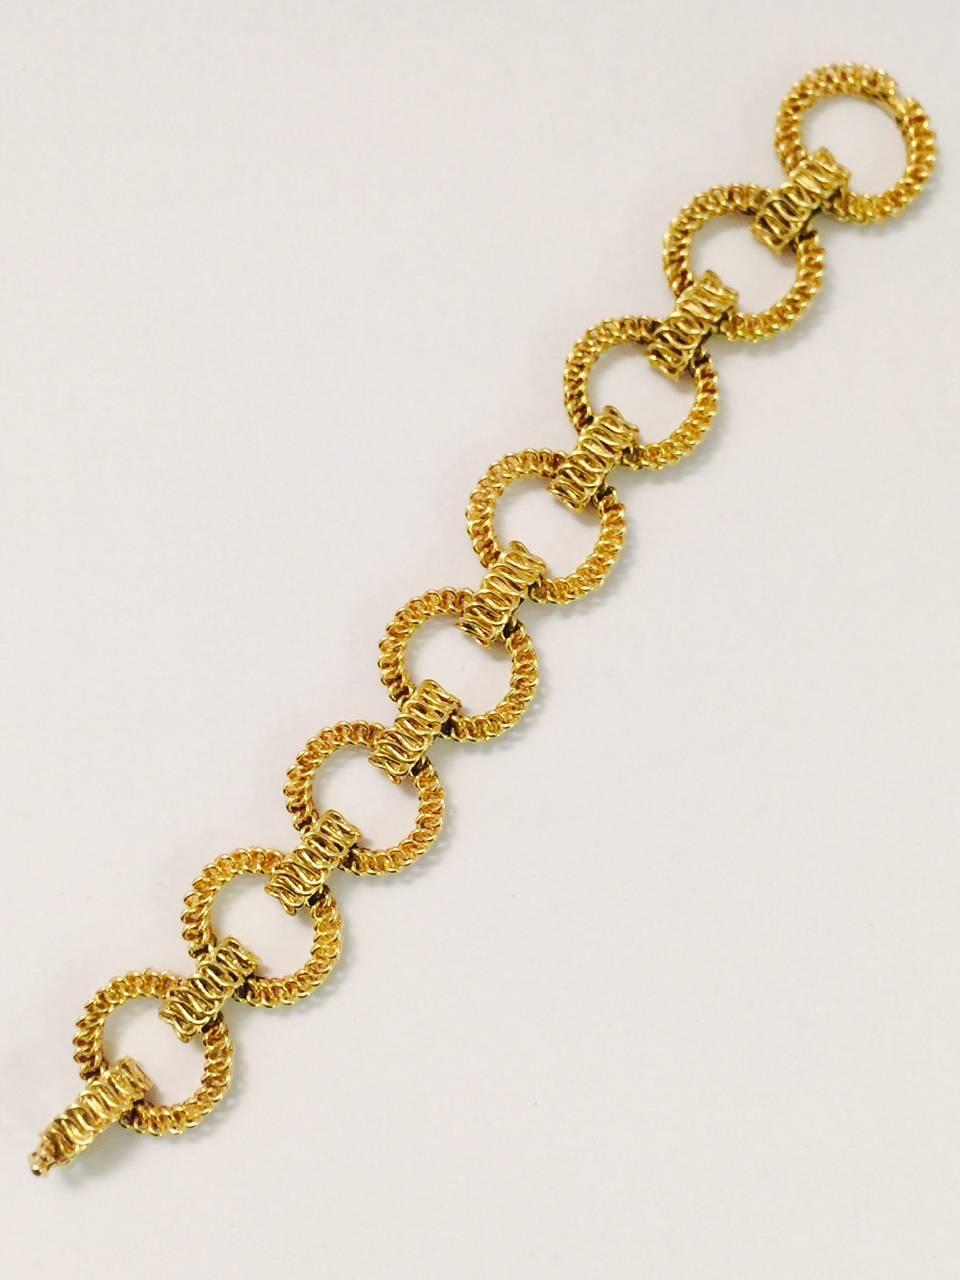 For Tiffany lovers worldwide!  A timeless, "wear daily" bracelet, meticulously crafted in 18 karat yellow gold.  Curved, open chain link circles are separated by matching narrow links in between each circle. Clasp with figure eight safety